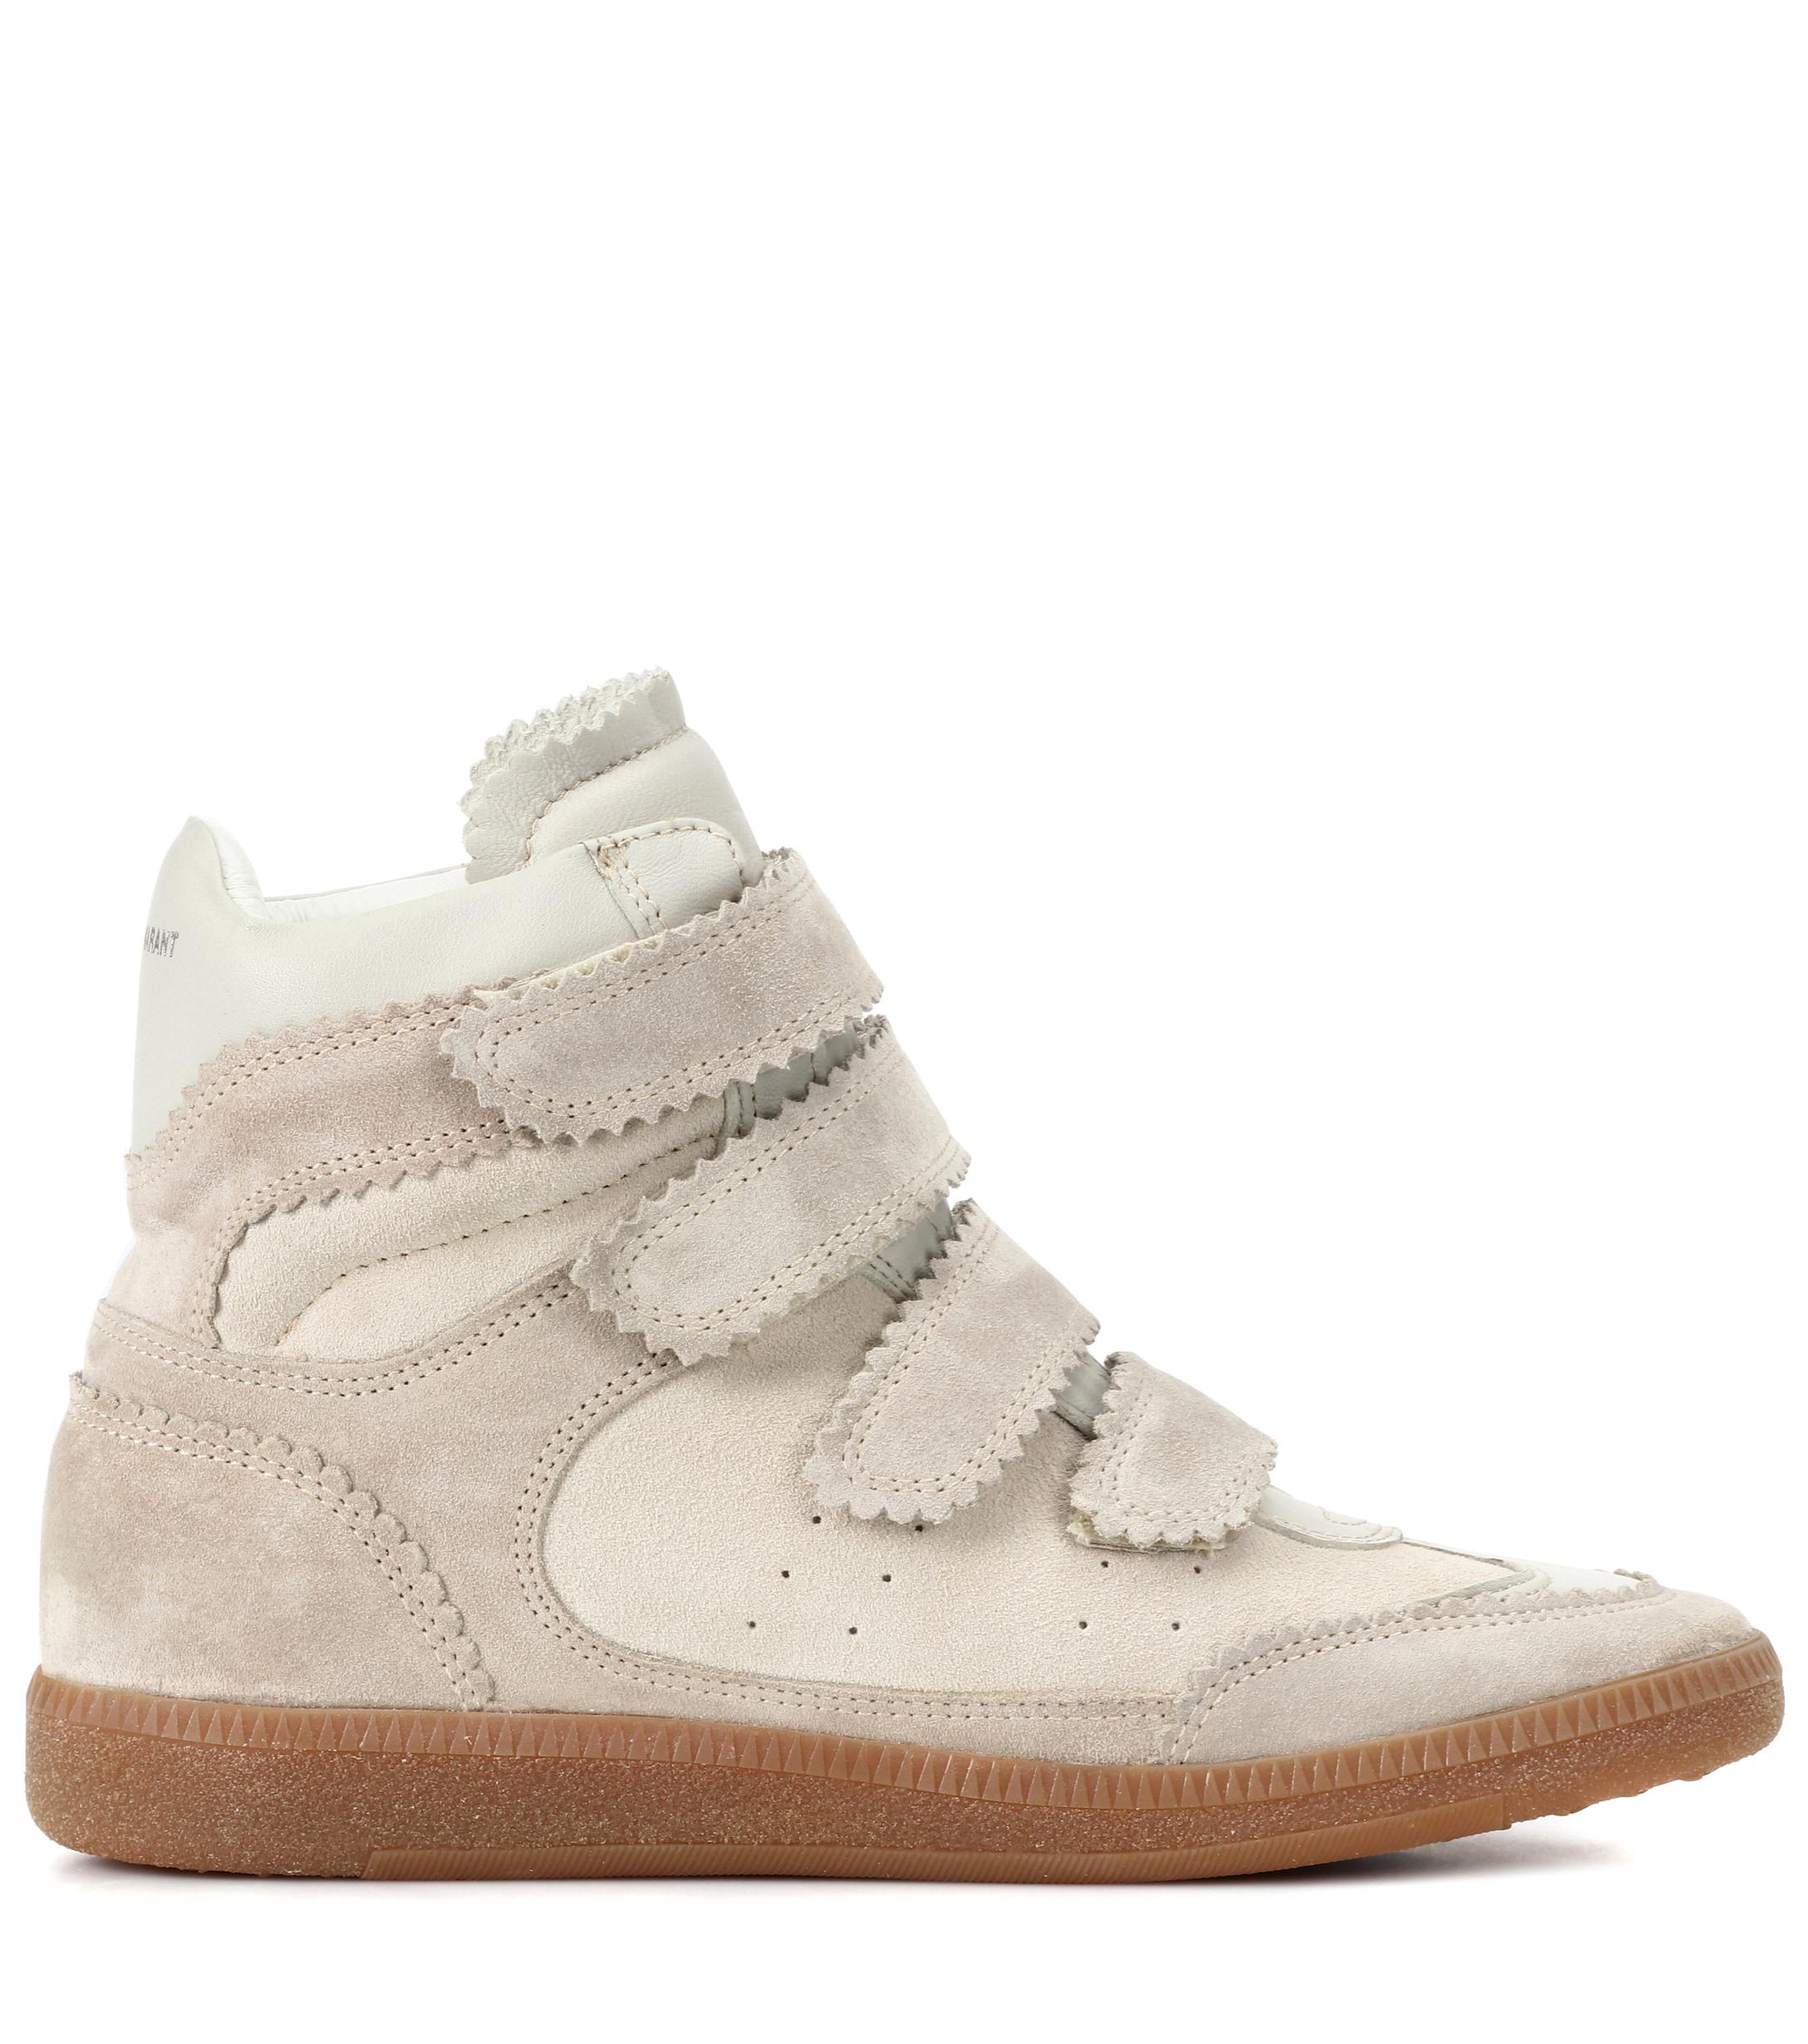 Isabel Marant Bilsy Suede High-top Sneakers in Beige (Natural) - Lyst